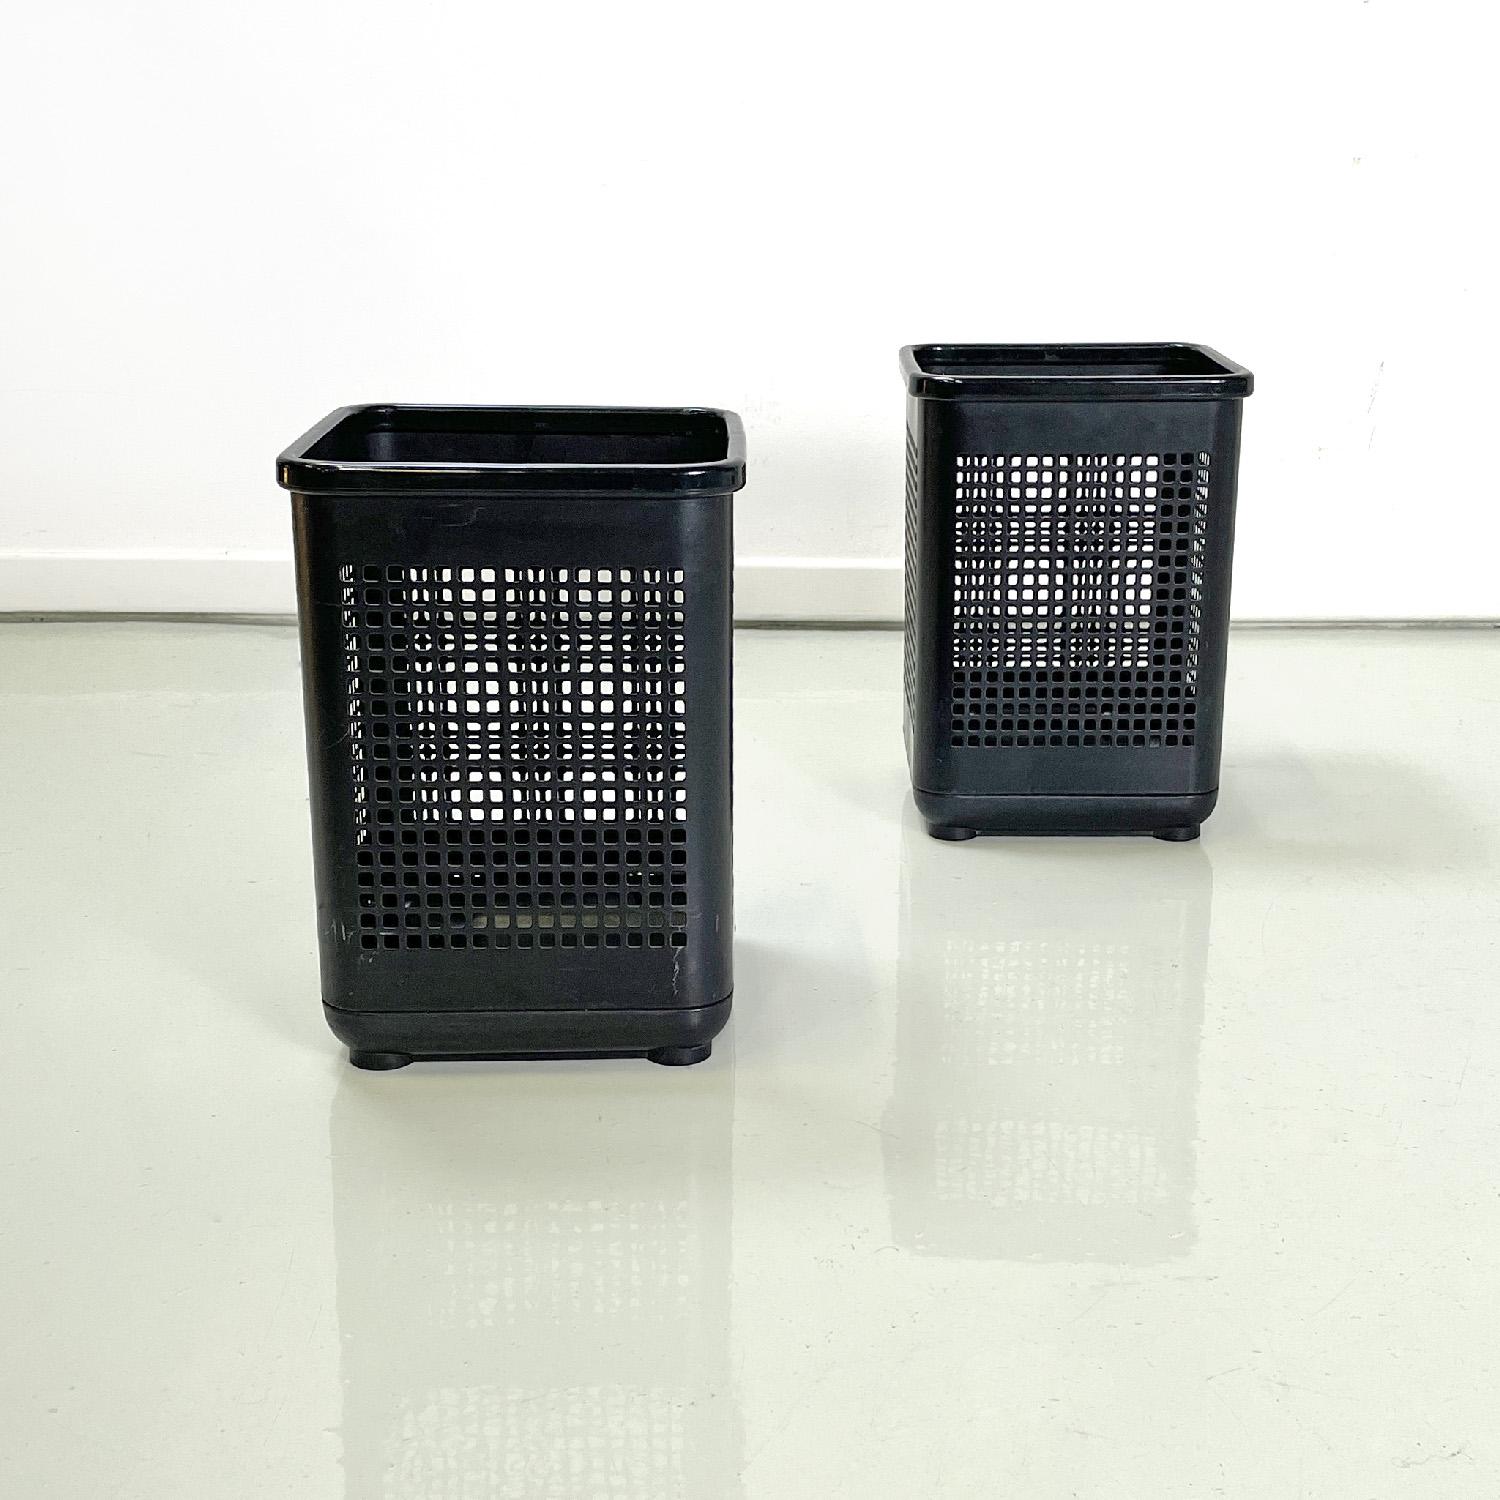 Italian modern office bins in black metal and plastic by Neolt, 1980s
Pair of square-based office bins. The main structure is made of a perforated sheet metal with square holes, and is painted black with a matte finish. The top and base with round